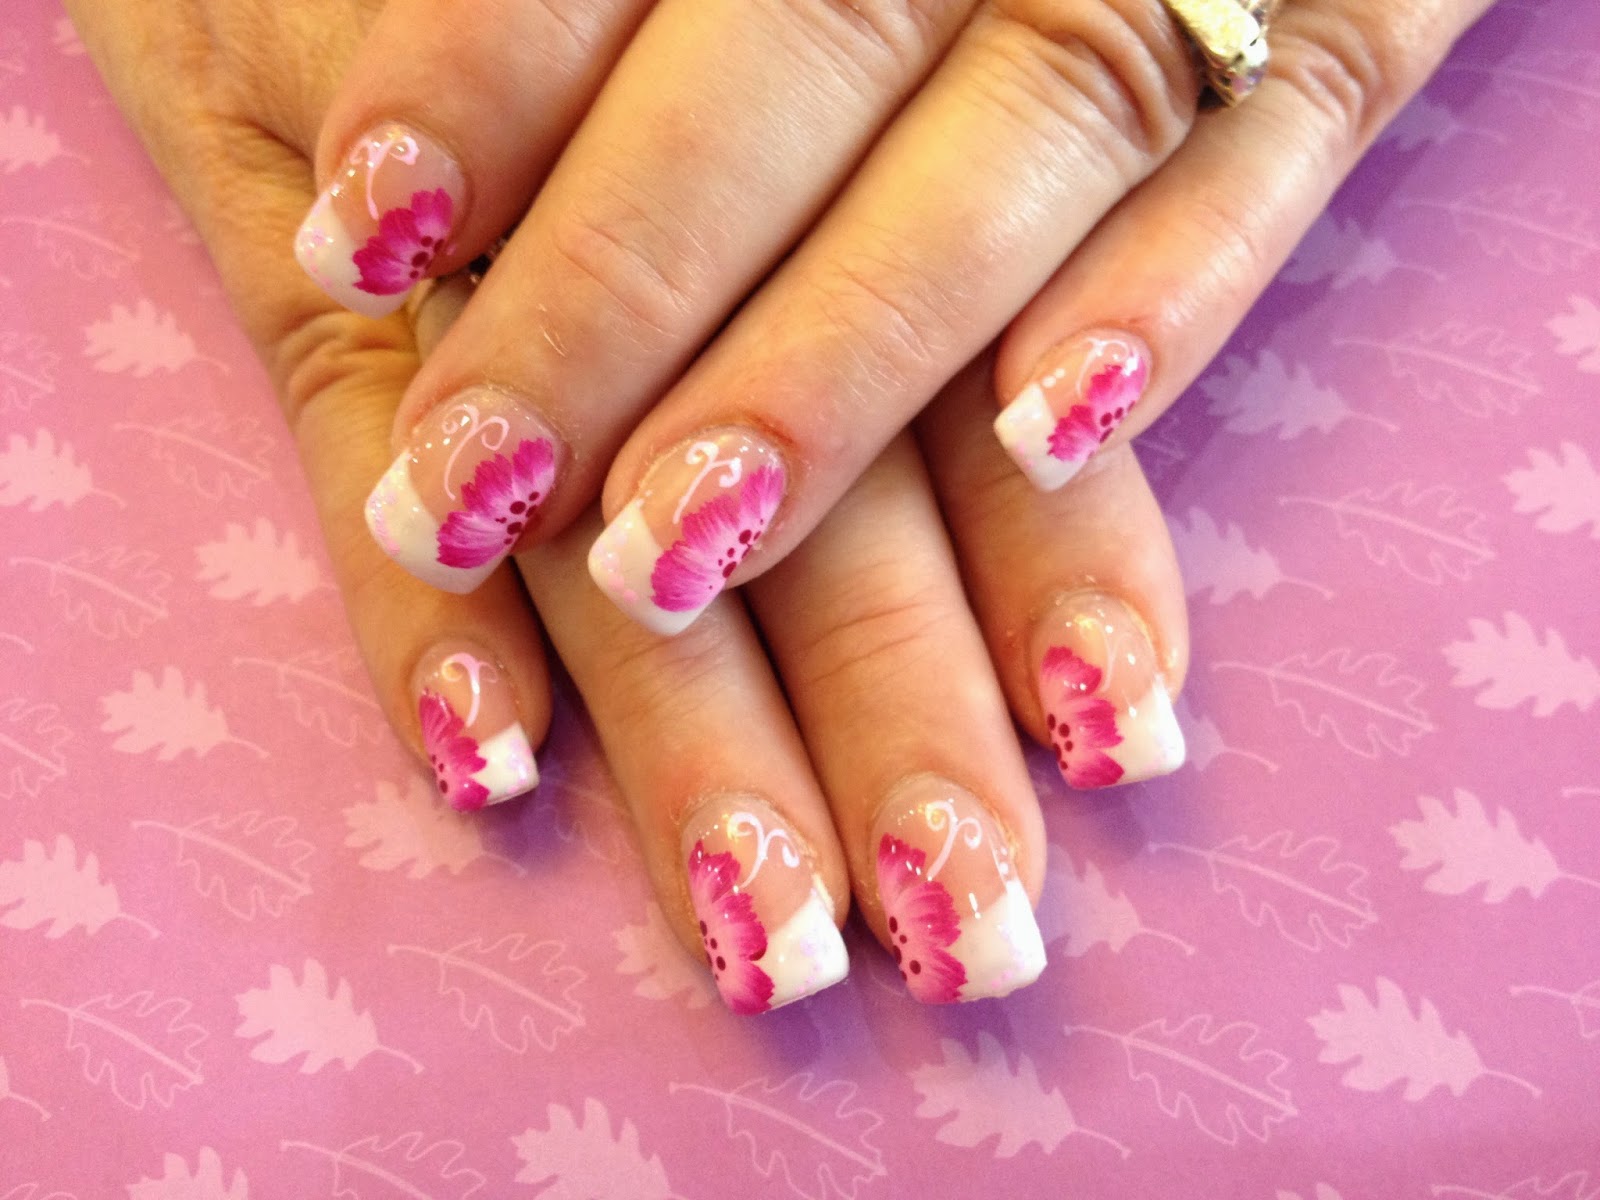 8. "French Manicure with Floral Designs on Tumblr" - wide 6